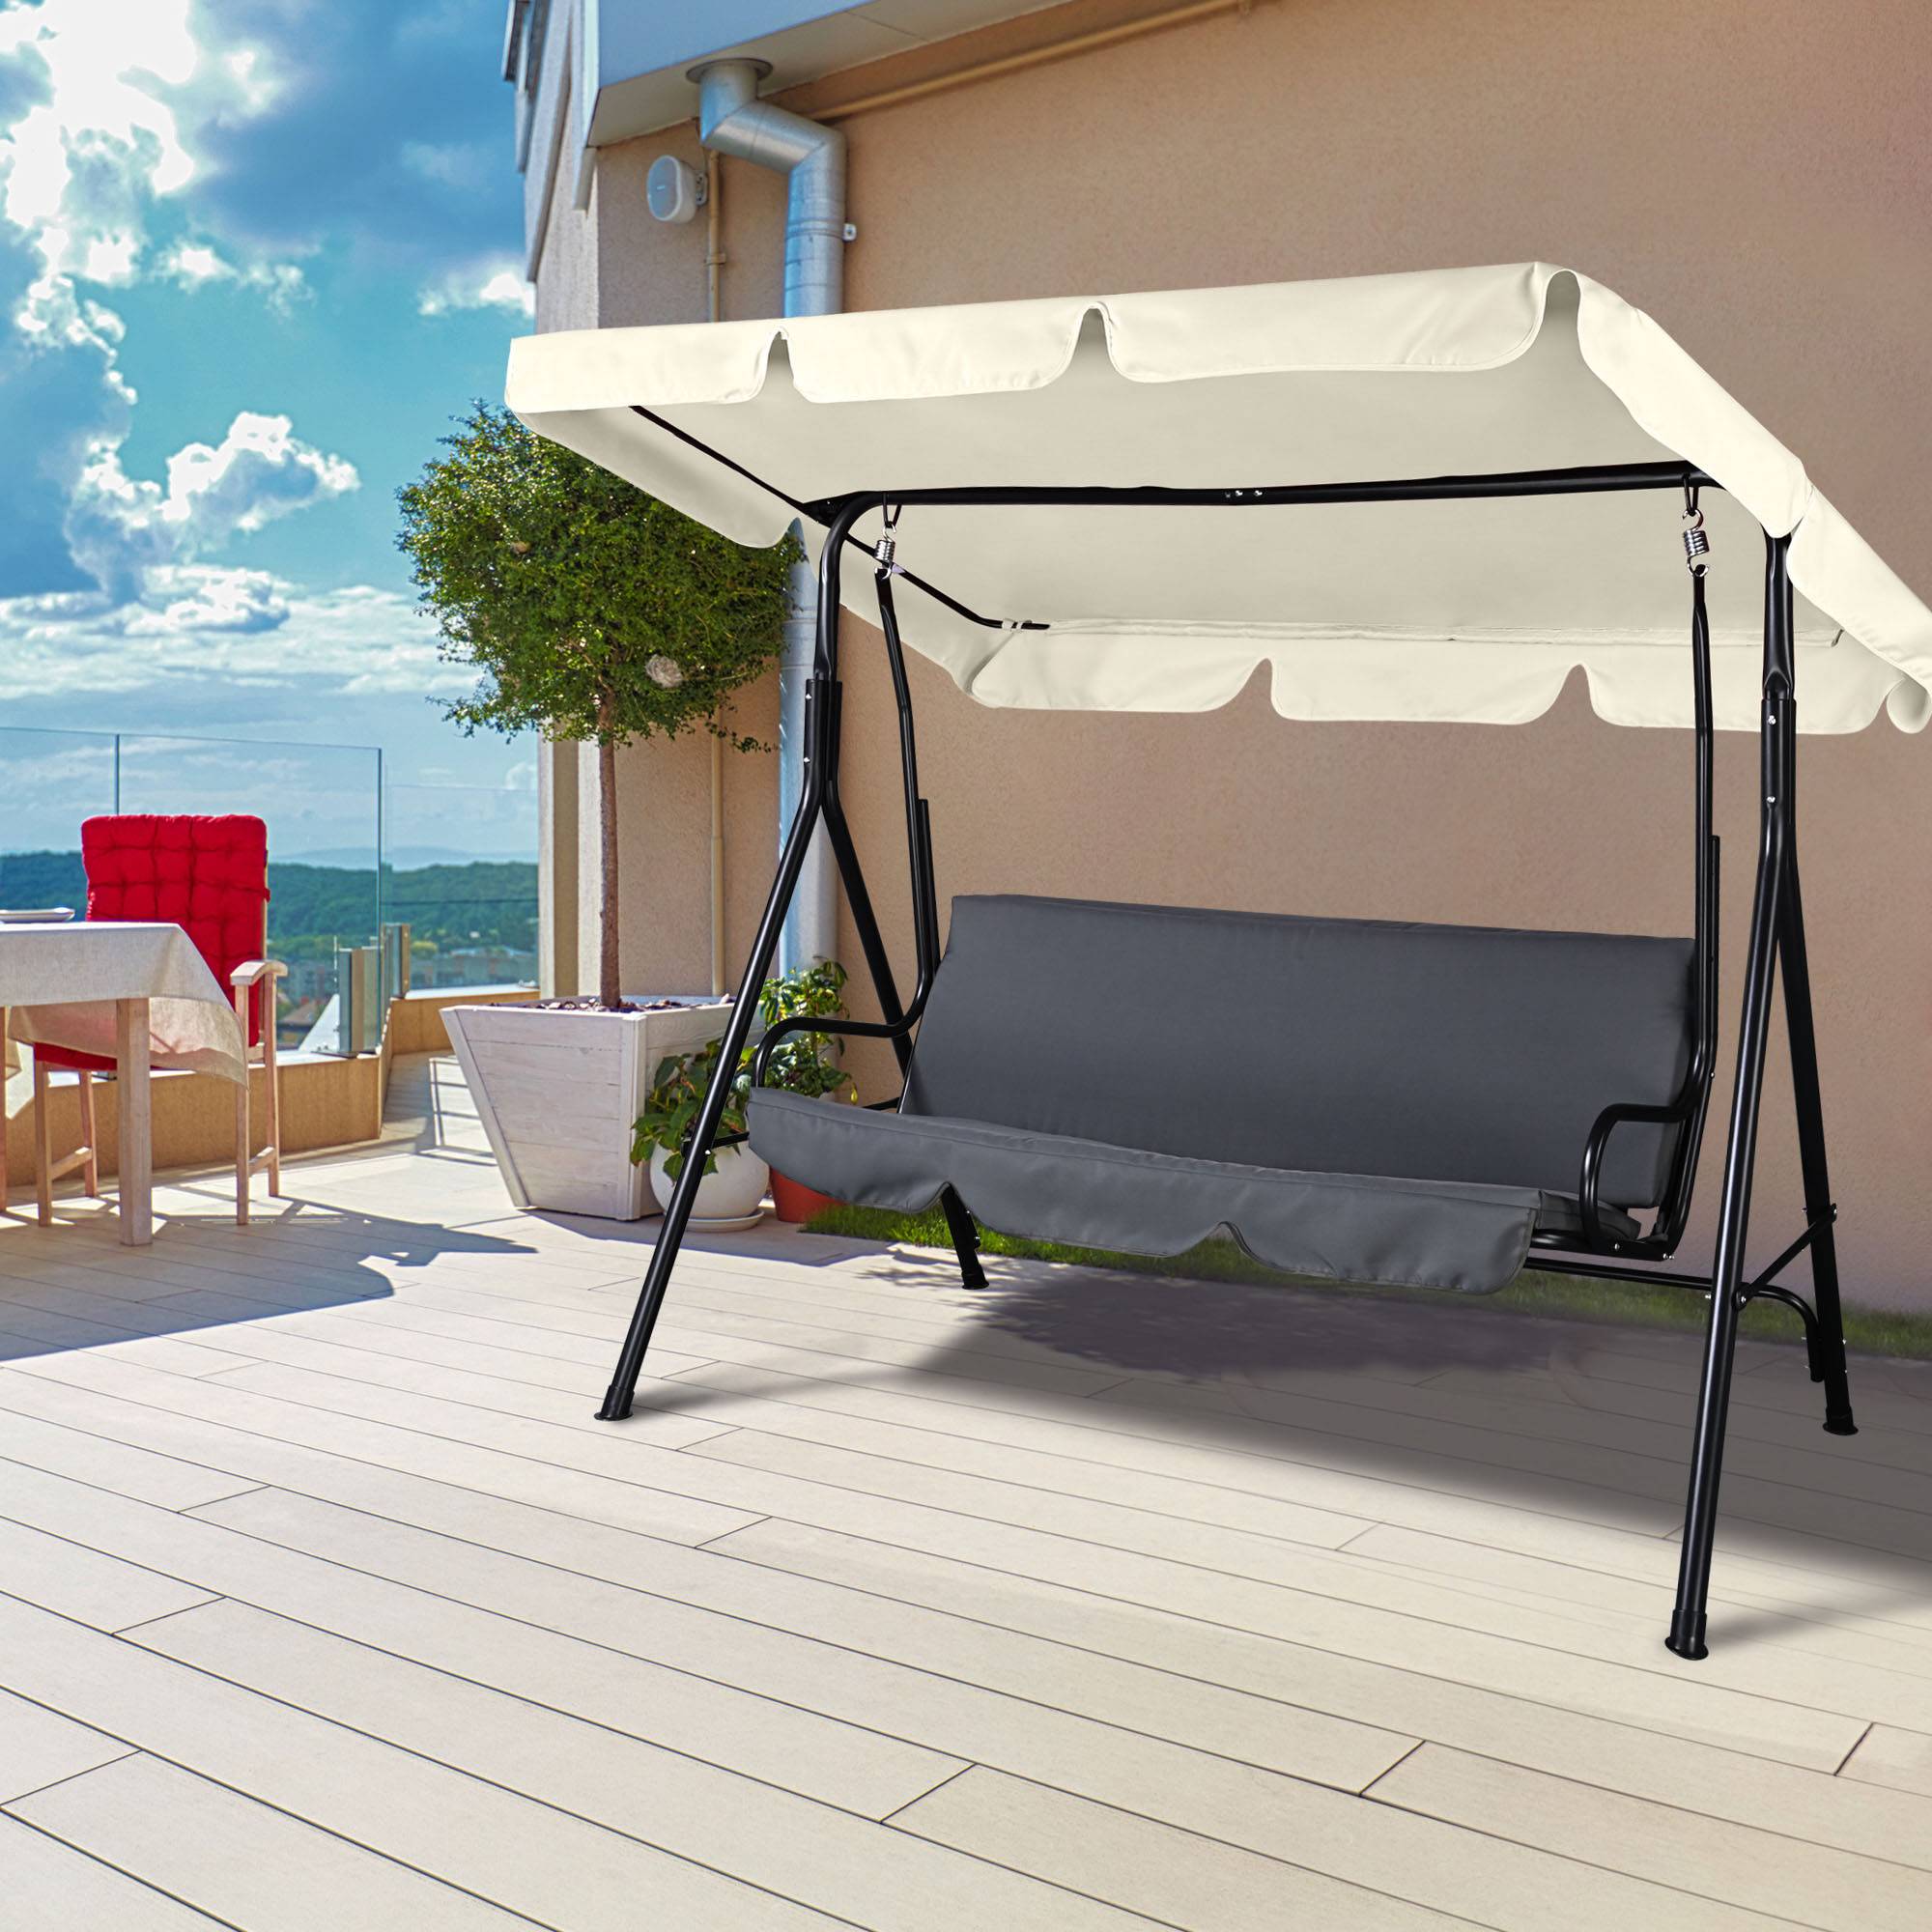 

76"x44" Outdoor Swing Cover Replacement Canopy Uv30+ 180gsm Top For Porch Patio Garden Pool Seat Beige